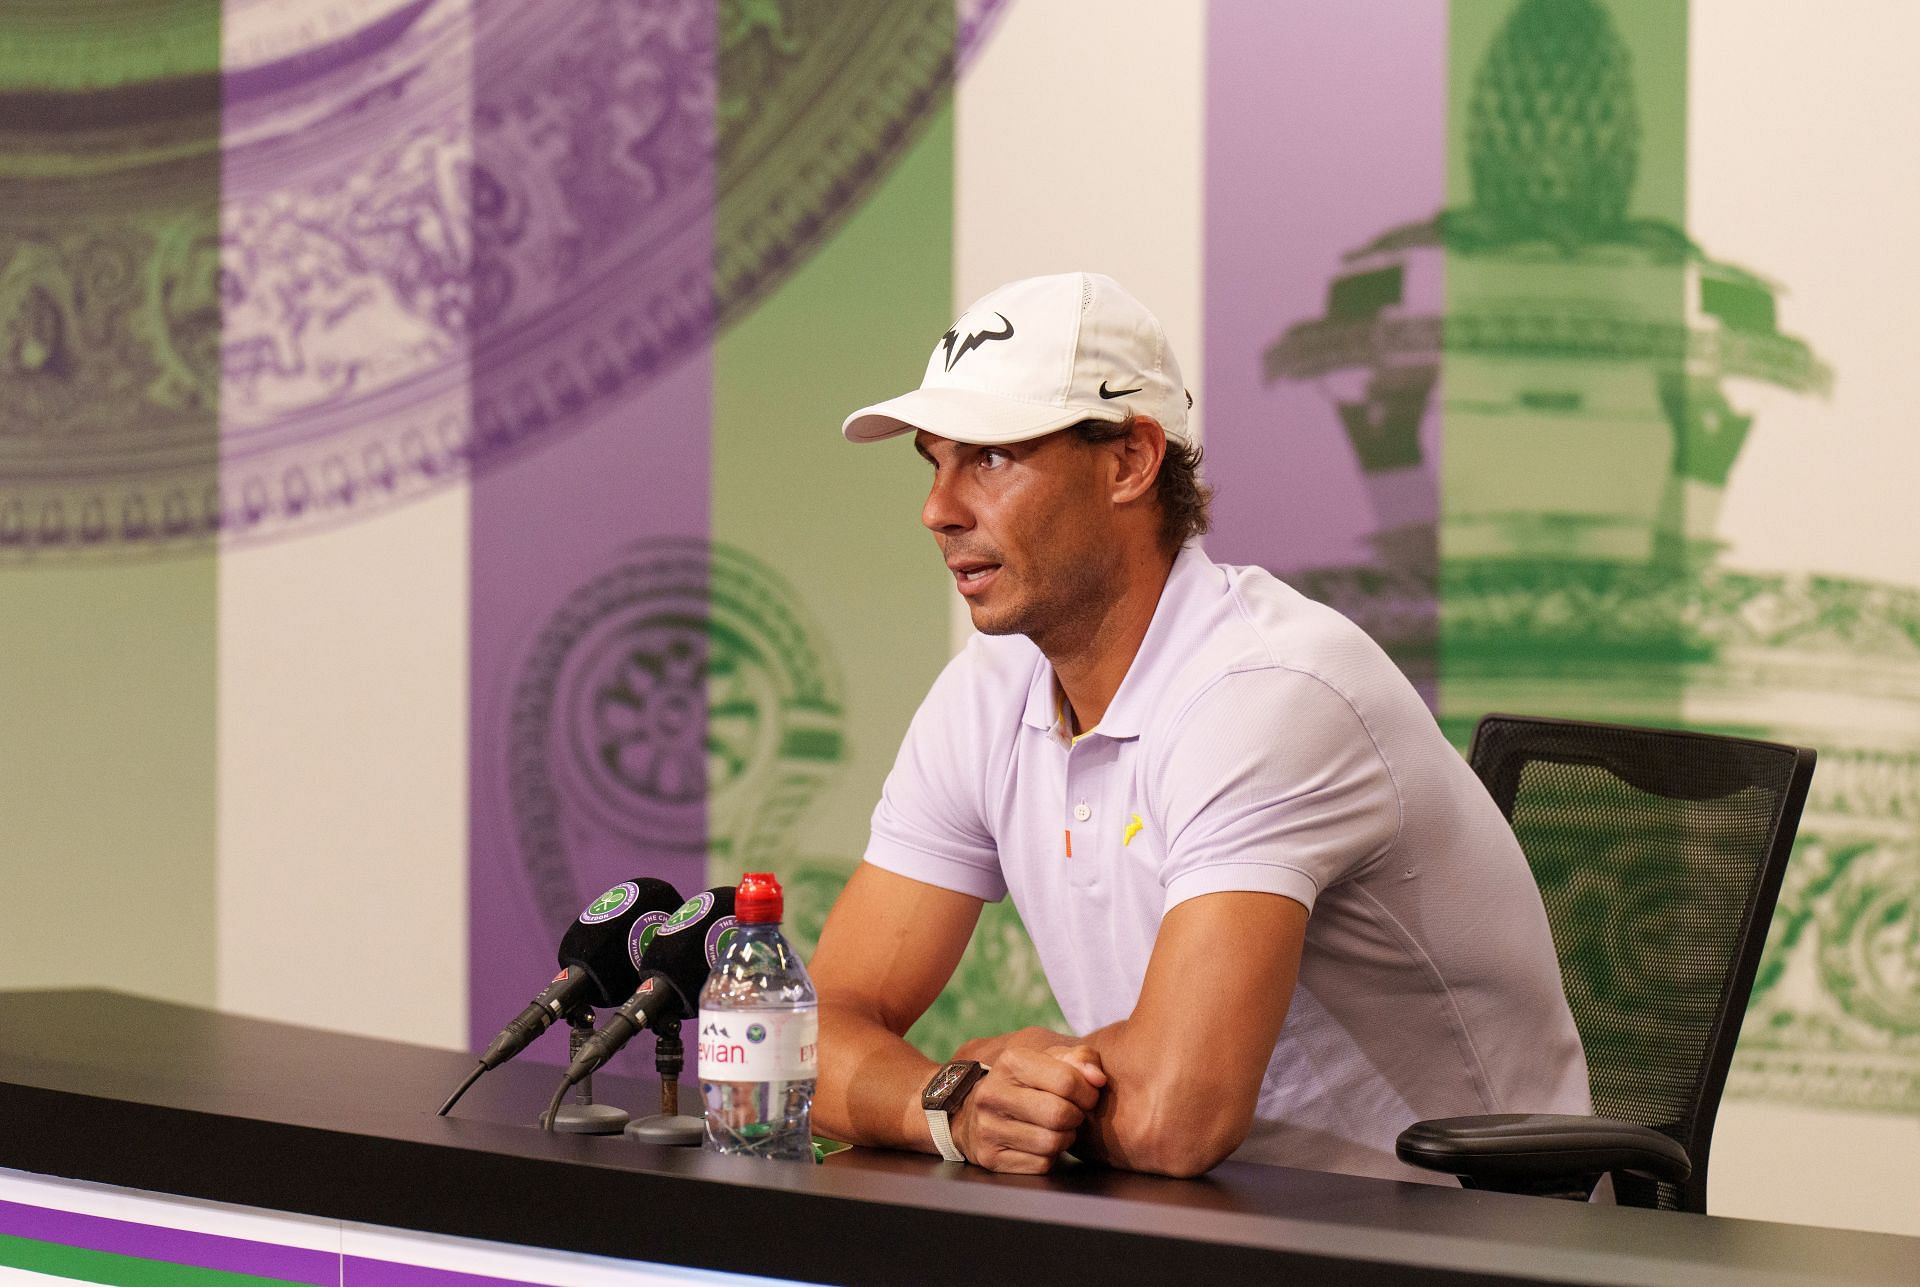 Rafael Nadal was forced to withdraw from SW19 following an abdominal tear